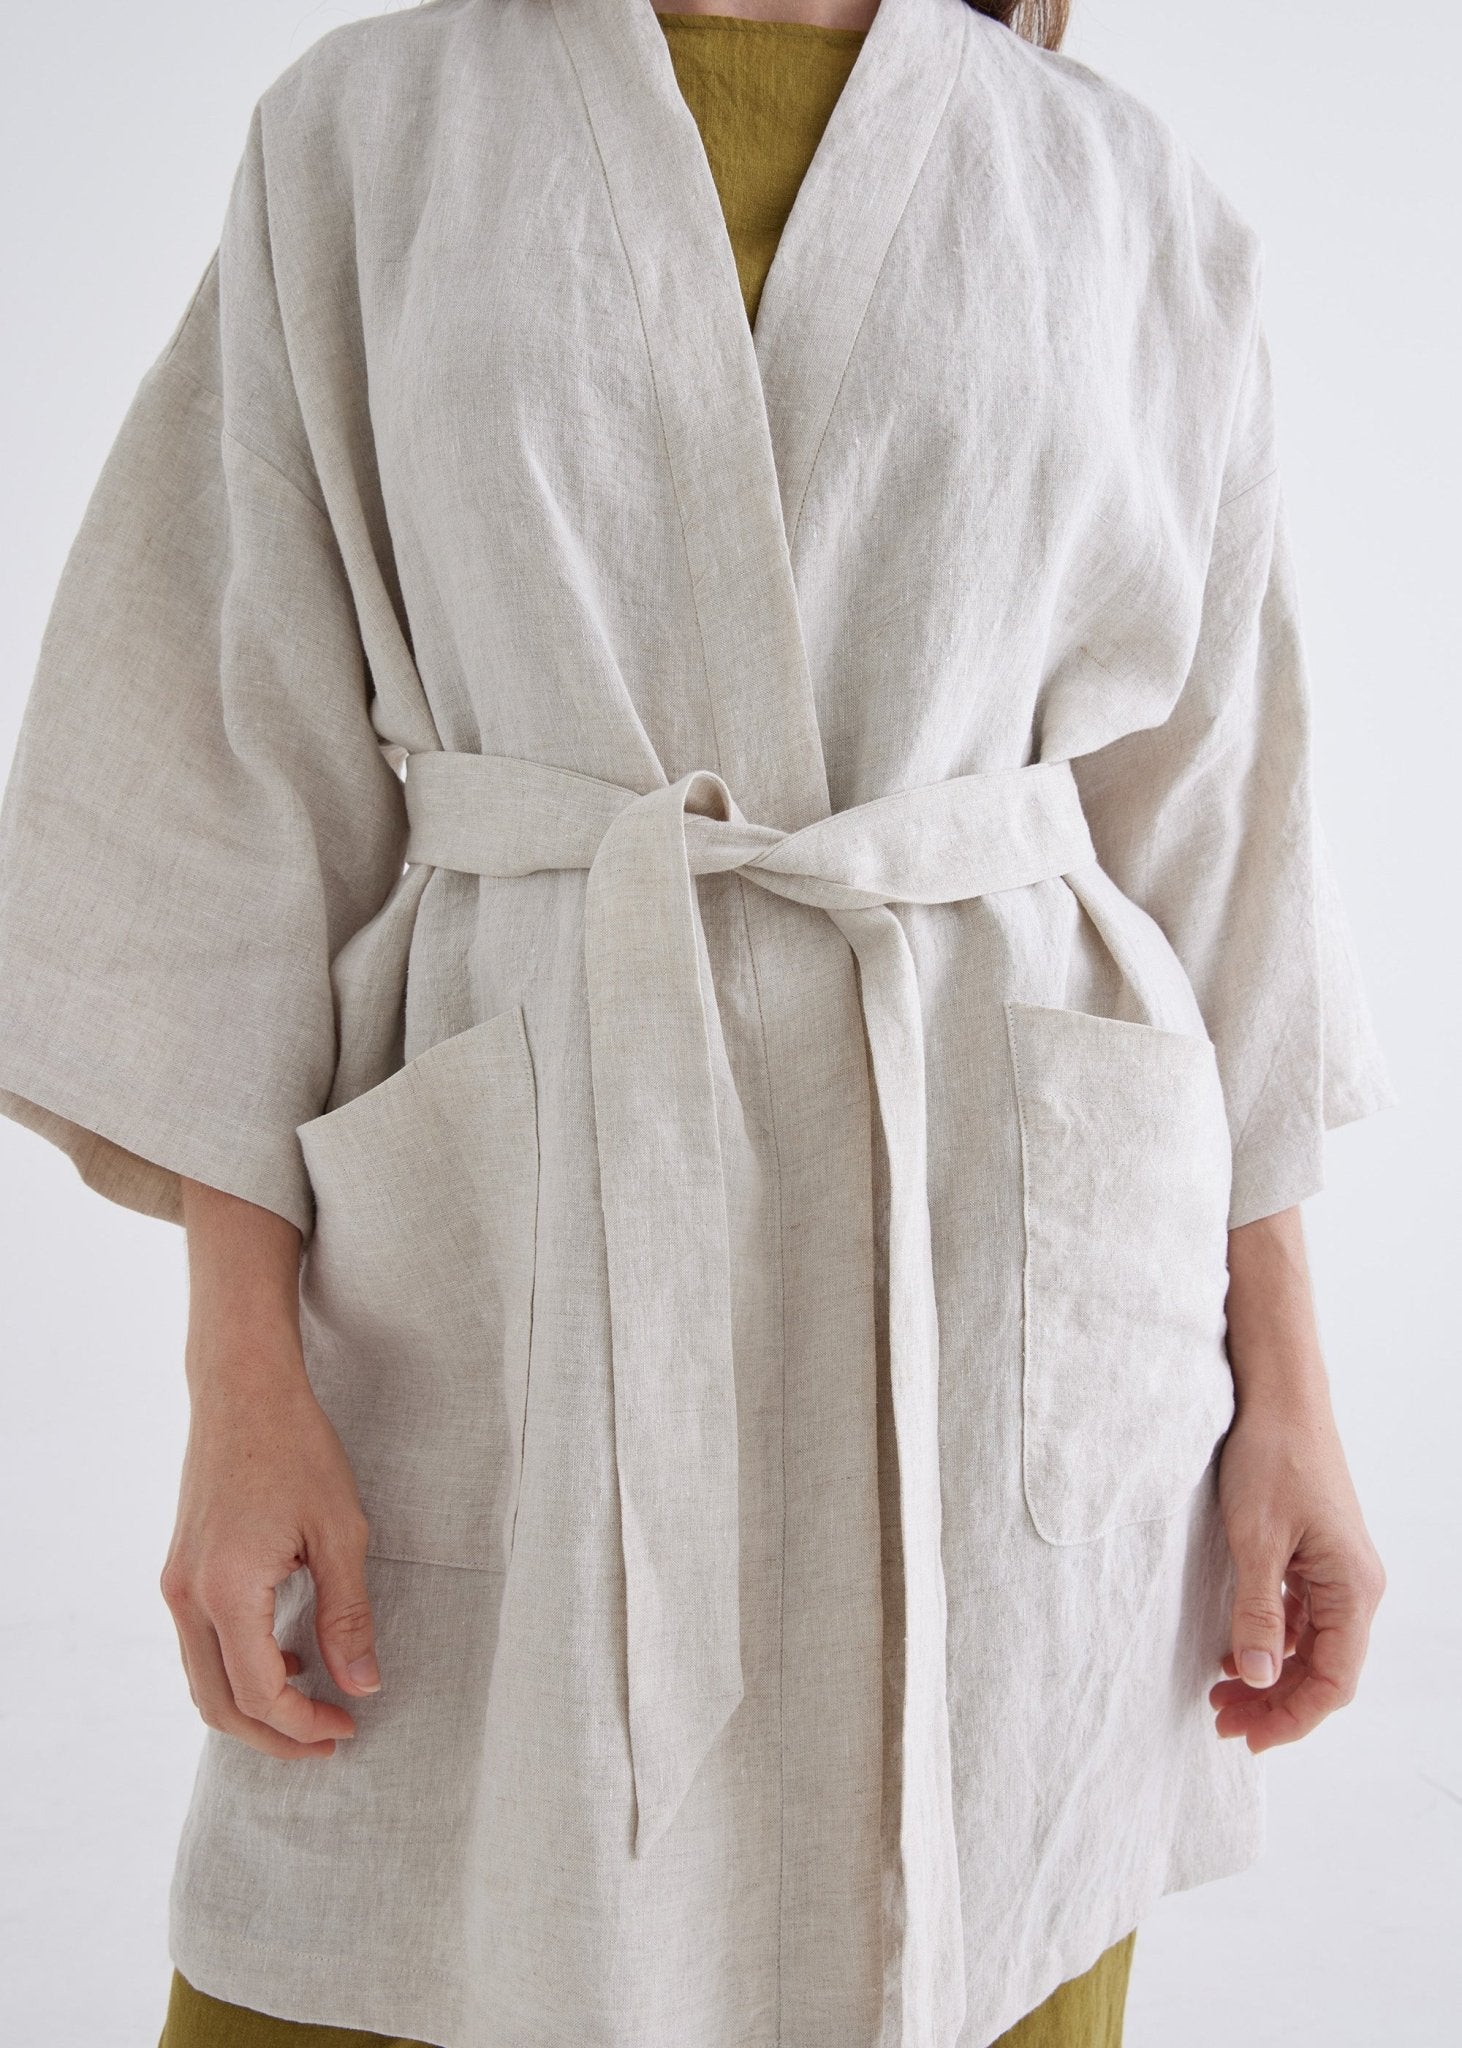 Linen Robe in Natural-Devina Louise-stride